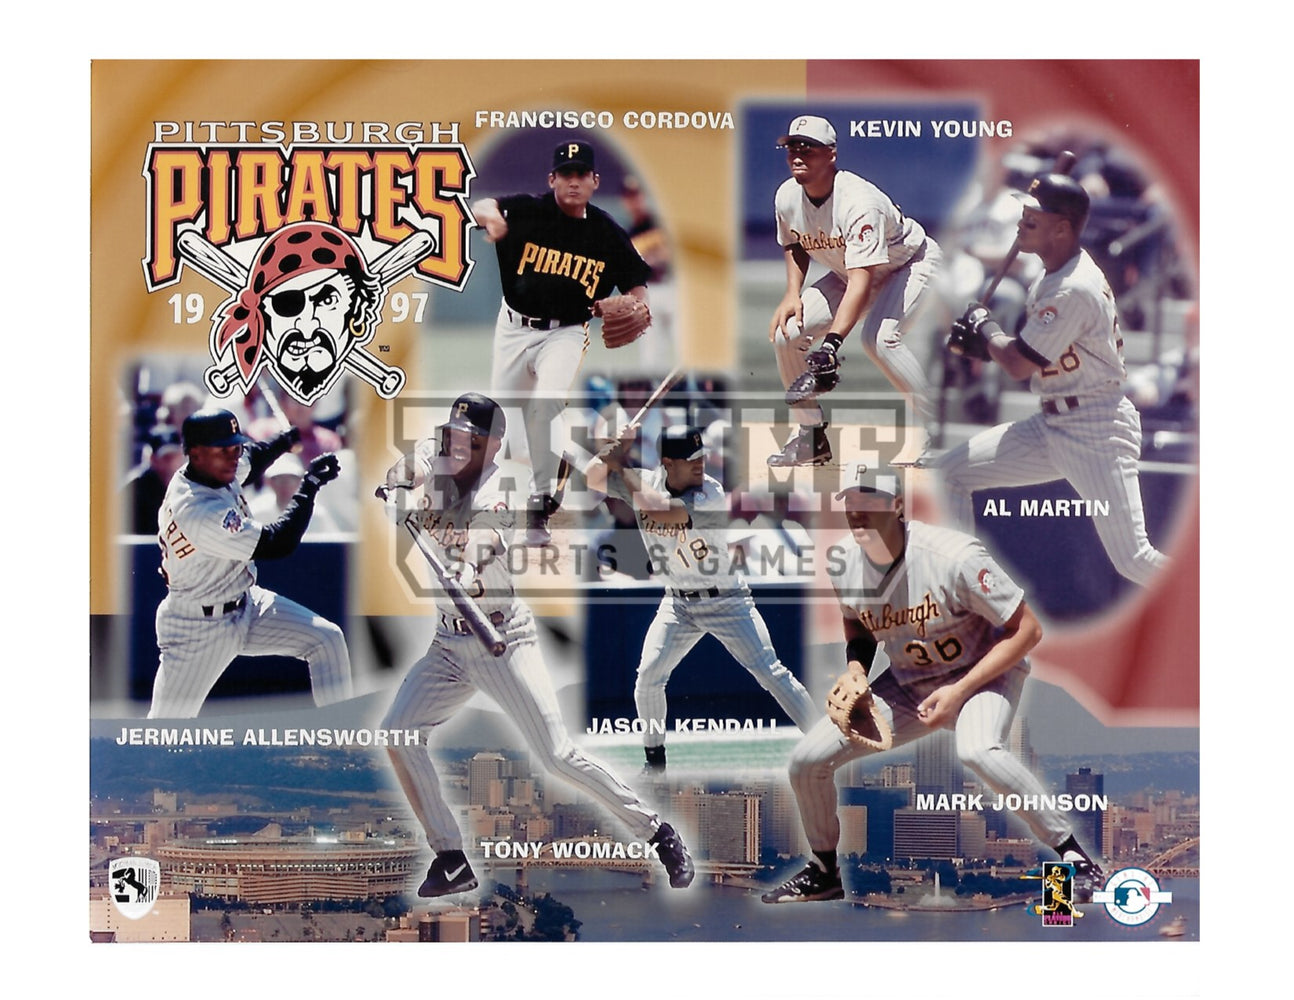 Pittsburgh Pirates 8X10 (Player Photo) - Pastime Sports & Games